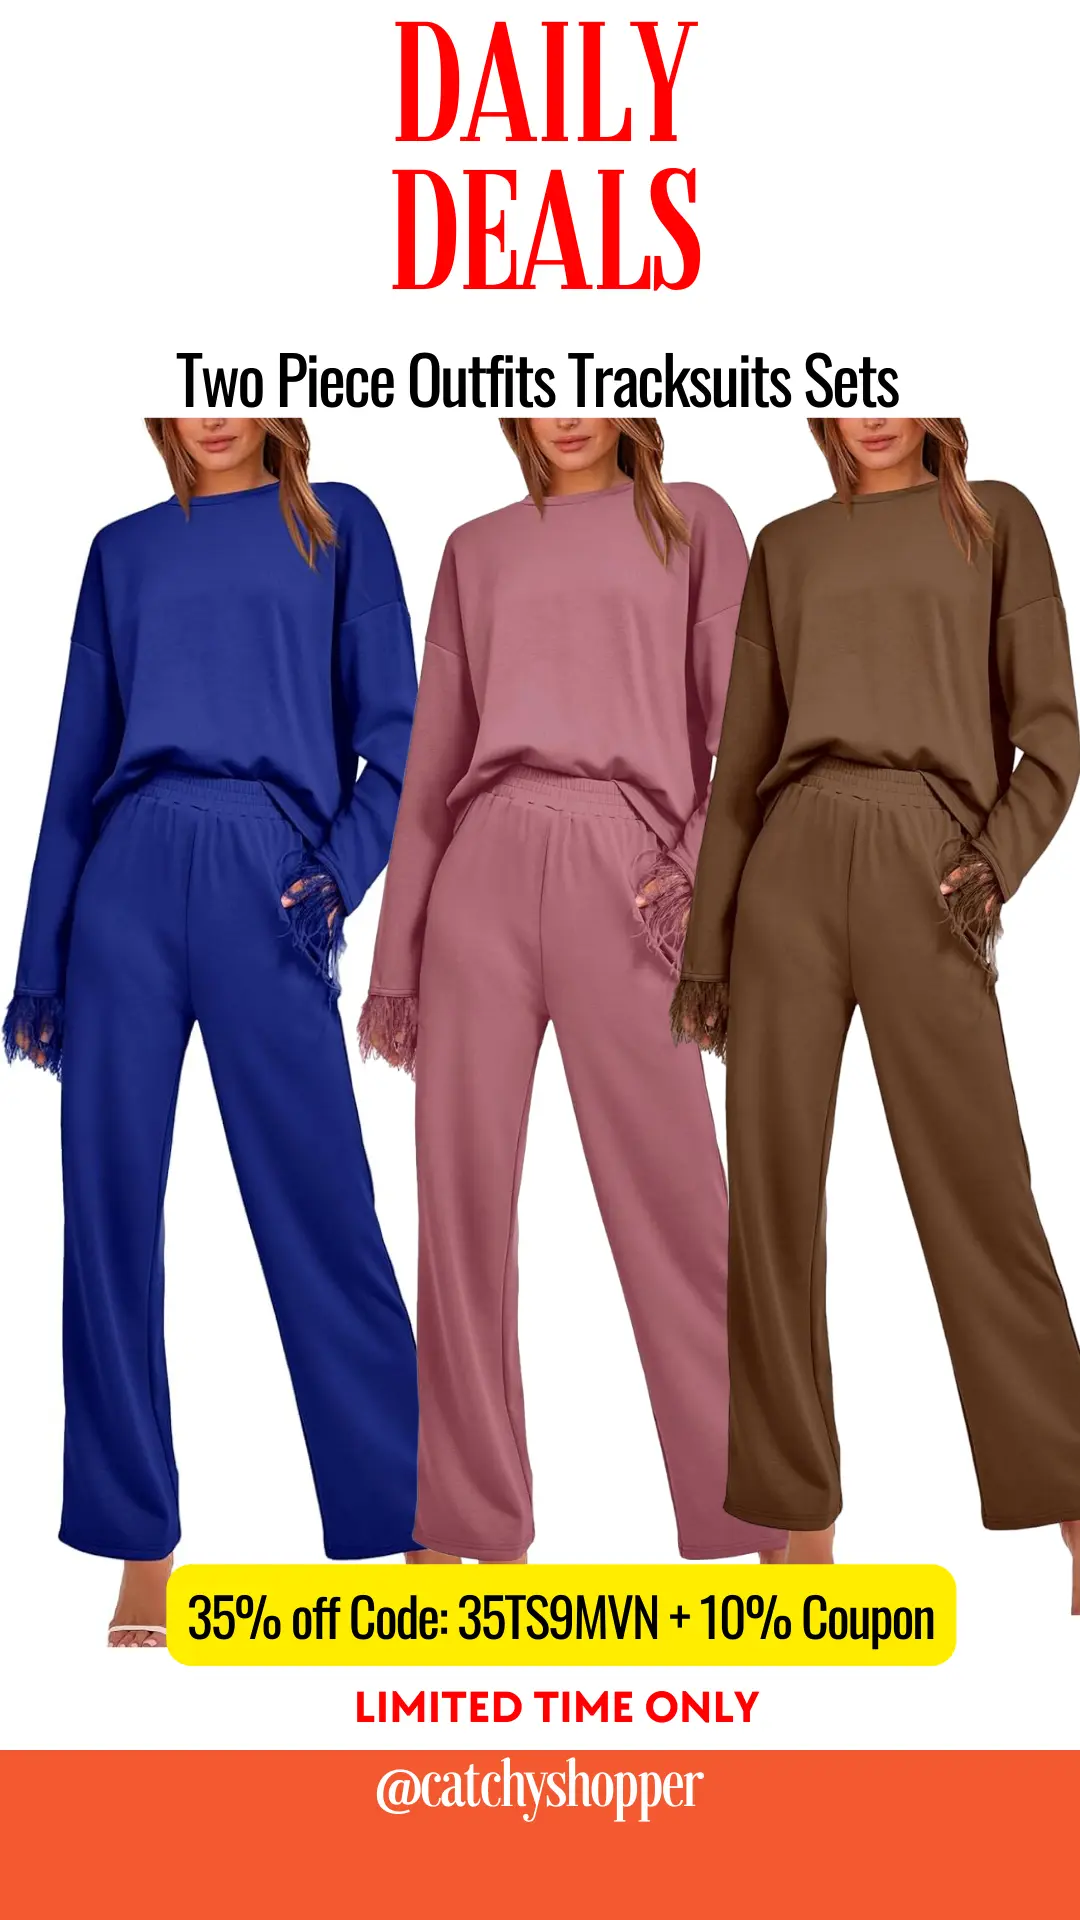 Two Piece Outfits Tracksuits Sets